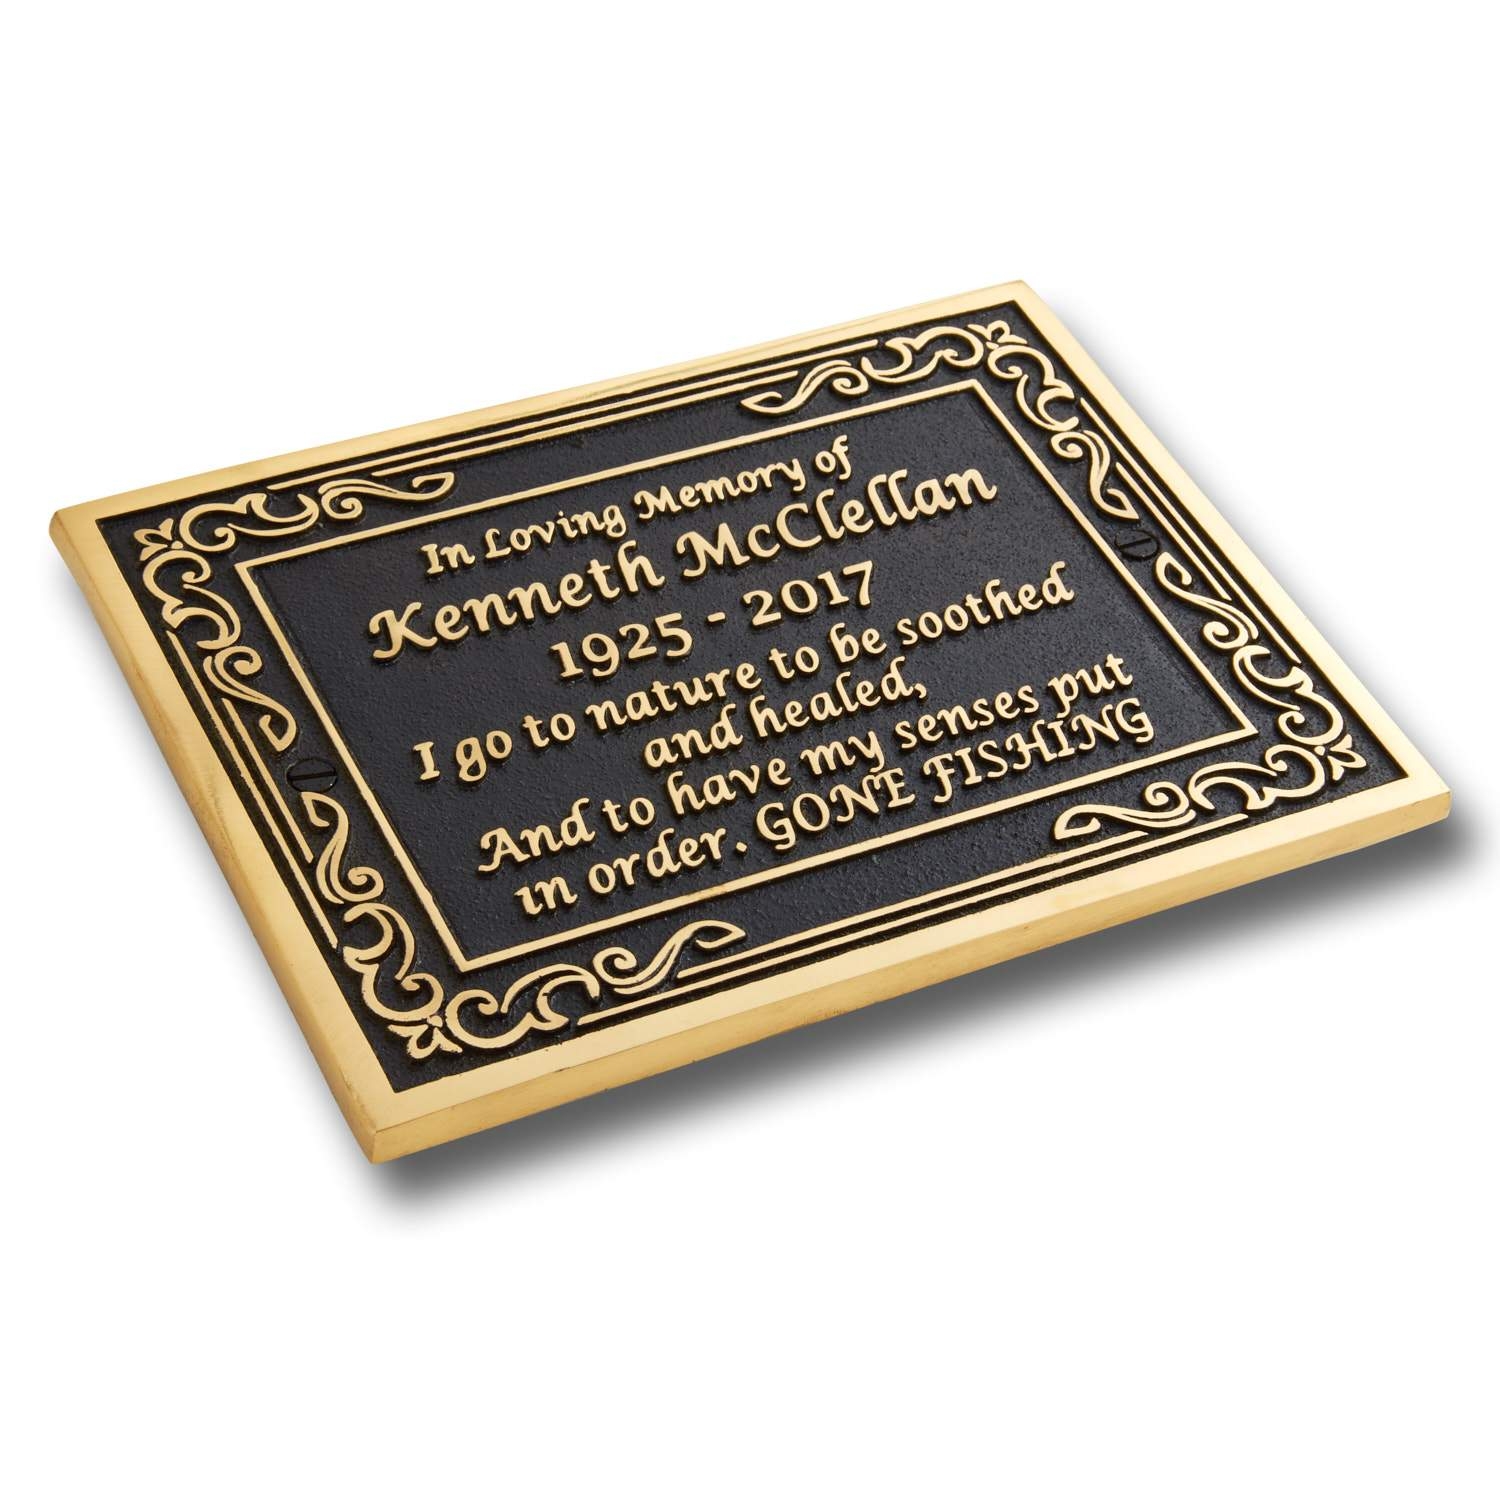 Personalised Memorial Ornate Metal Plaque For Memory Of A Loved One. Wall Mounted Or With Garden Stake As Garden Stones Statue Gift Alternative Idea In Brass – Garden Stake